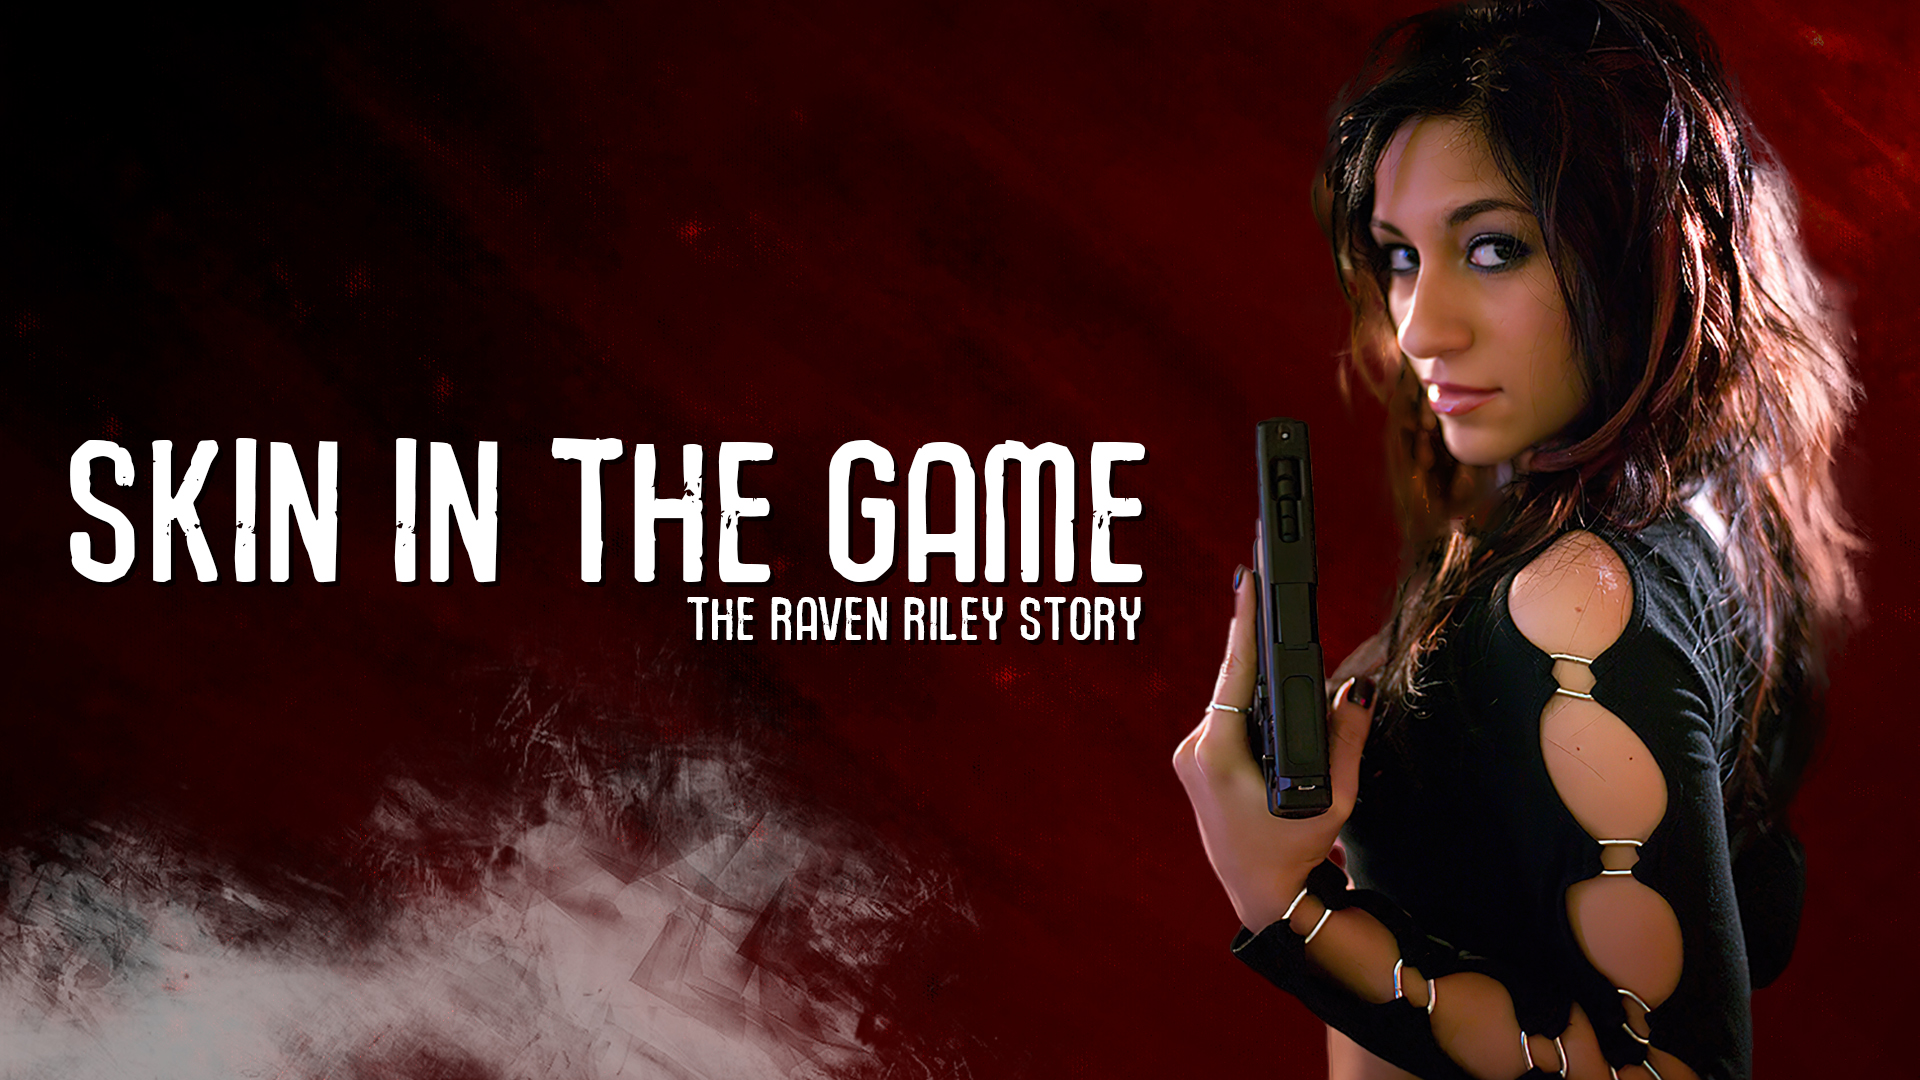 <strong>&#8220;Skin In The Game &#8211; The Raven Riley Story” by David Pilot Released</strong>